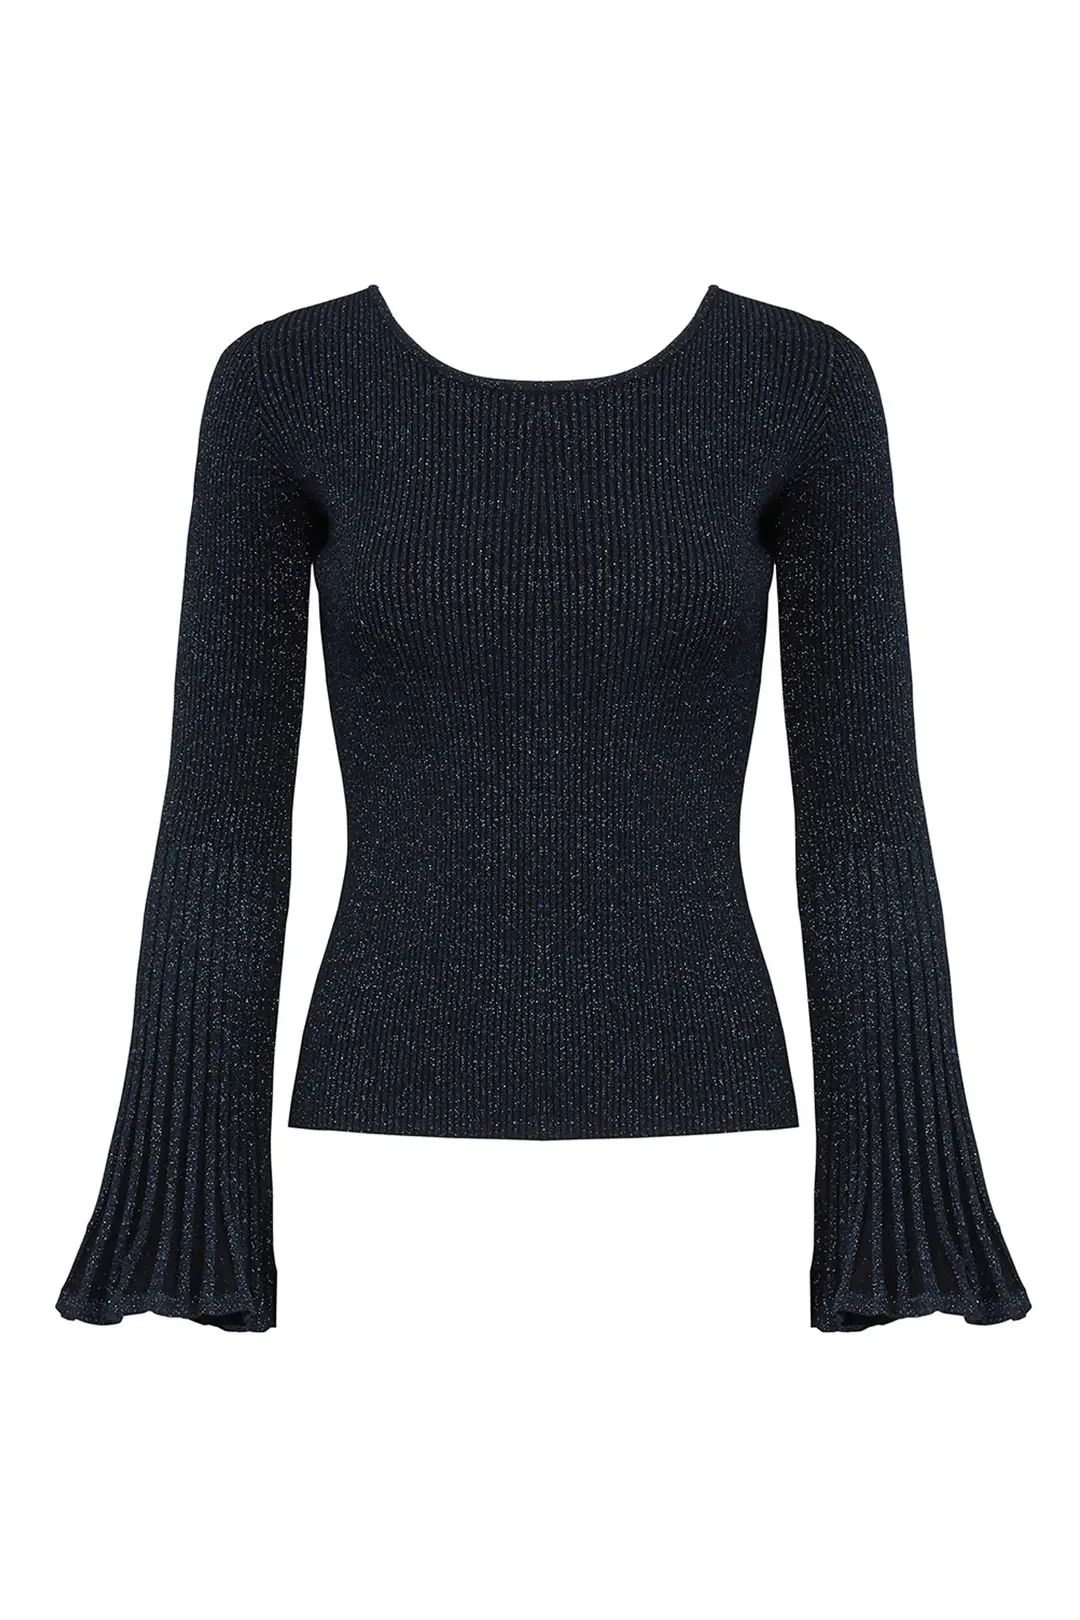 Milly Navy Bella Sweater | Rent The Runway